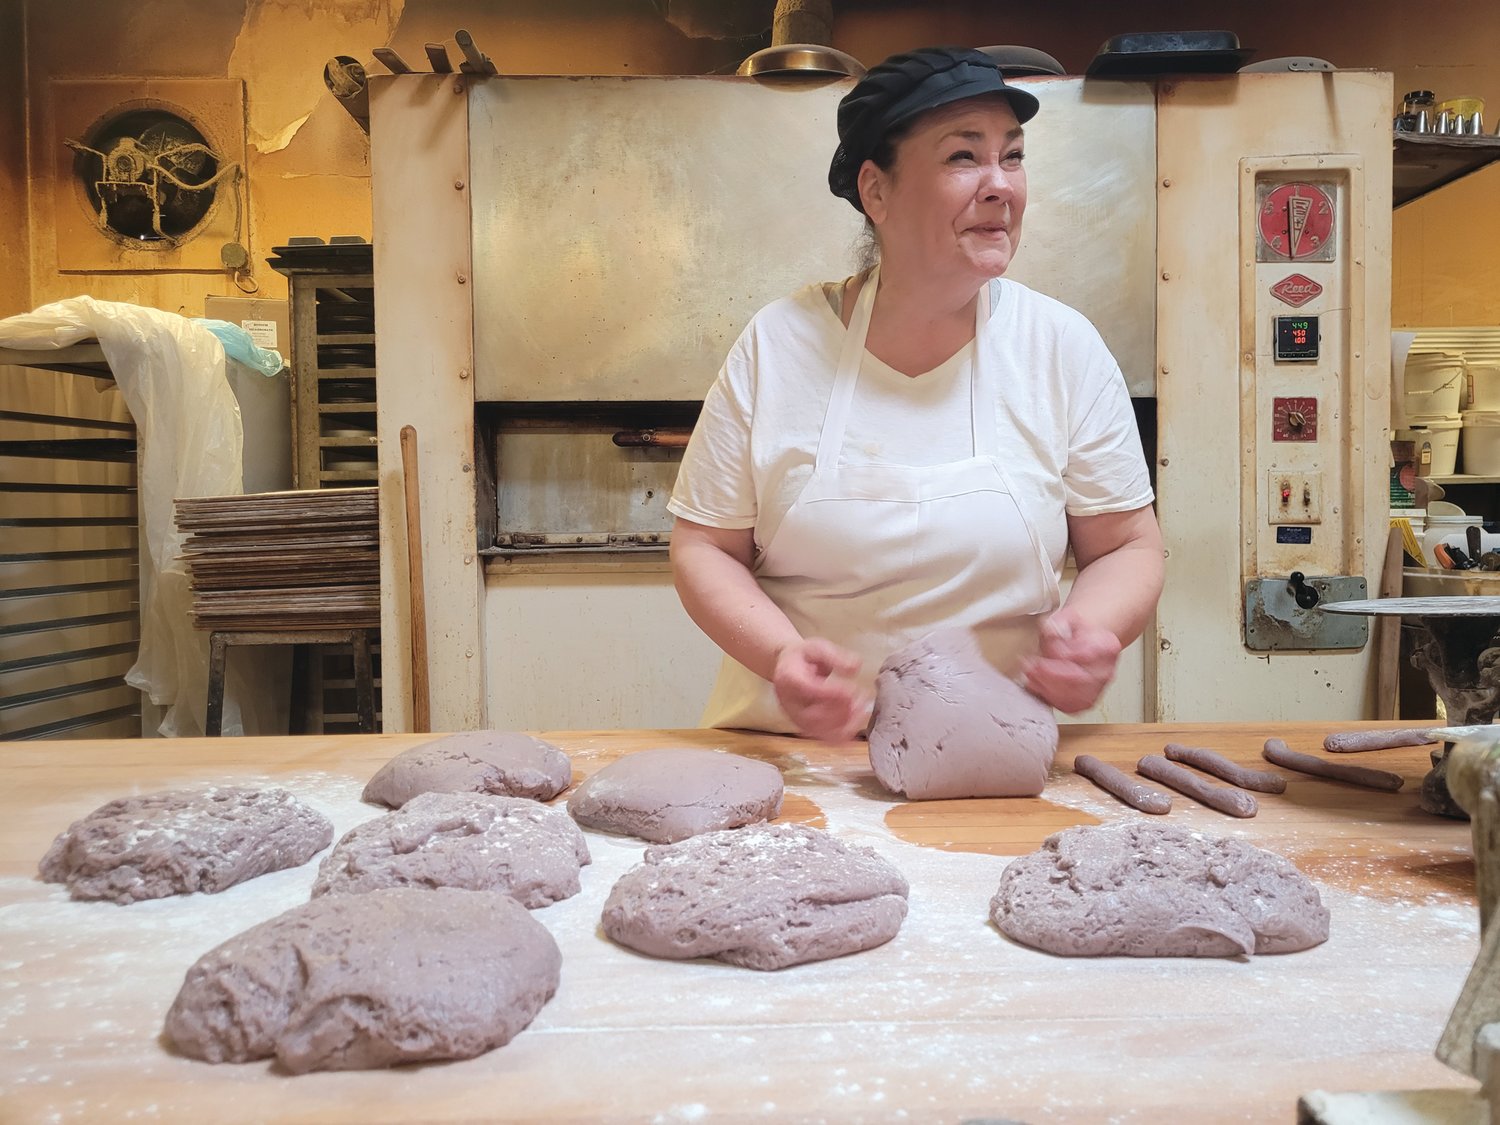 WINE, DON’T WHINE: Elena Pennacchini stood in the back of her family bakery, Solitro’s, rolling purple piles of dough into small circular twisted wine biscuits.